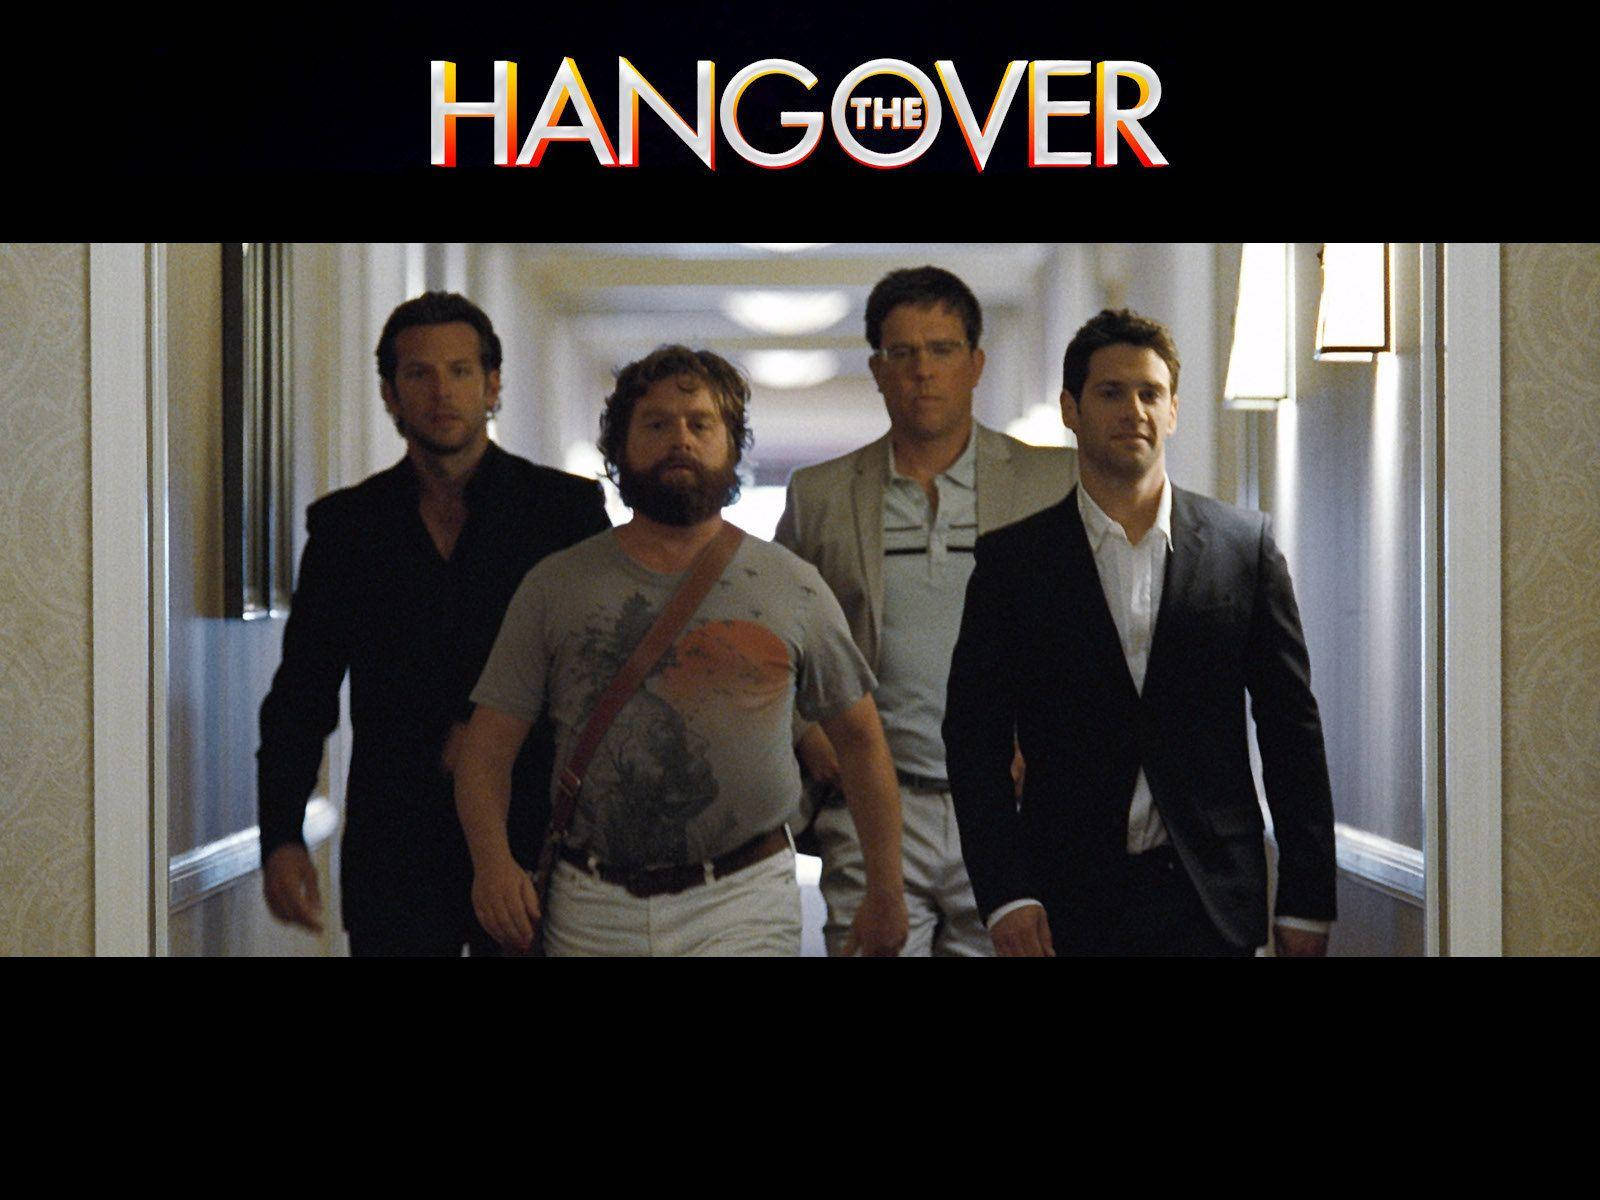 The Hangover Movie Poster Wolfpack Team Walking Wallpaper